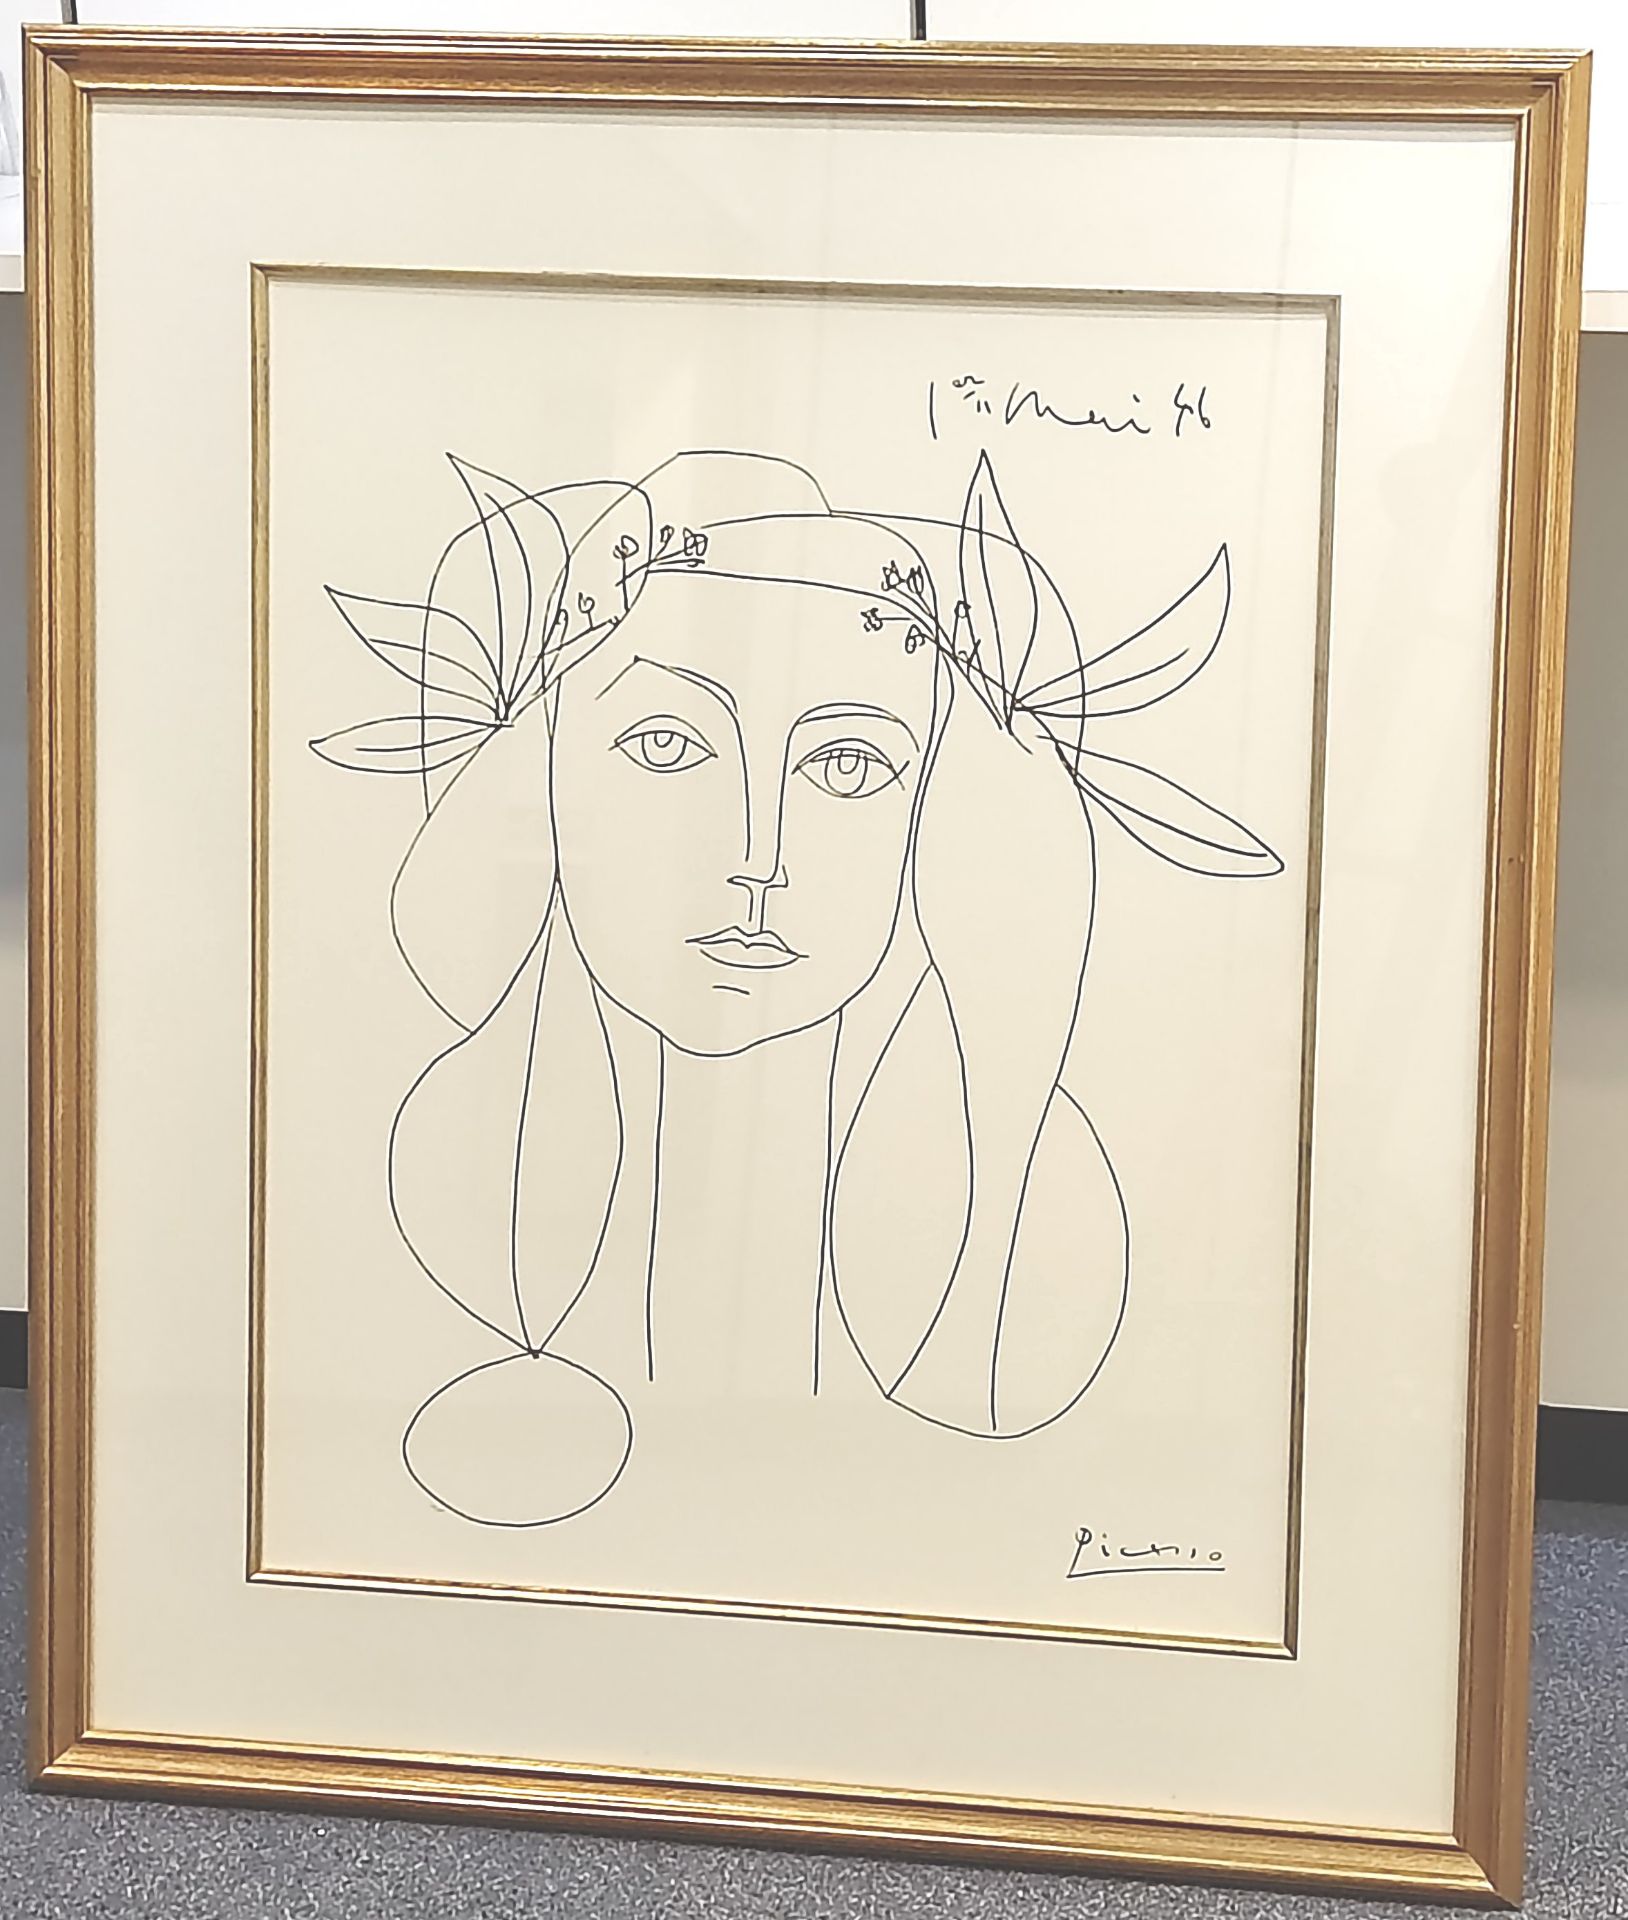 Pablo Picasso (1881- 1973) "Face of May" Offset-Lithographie auf Bütten